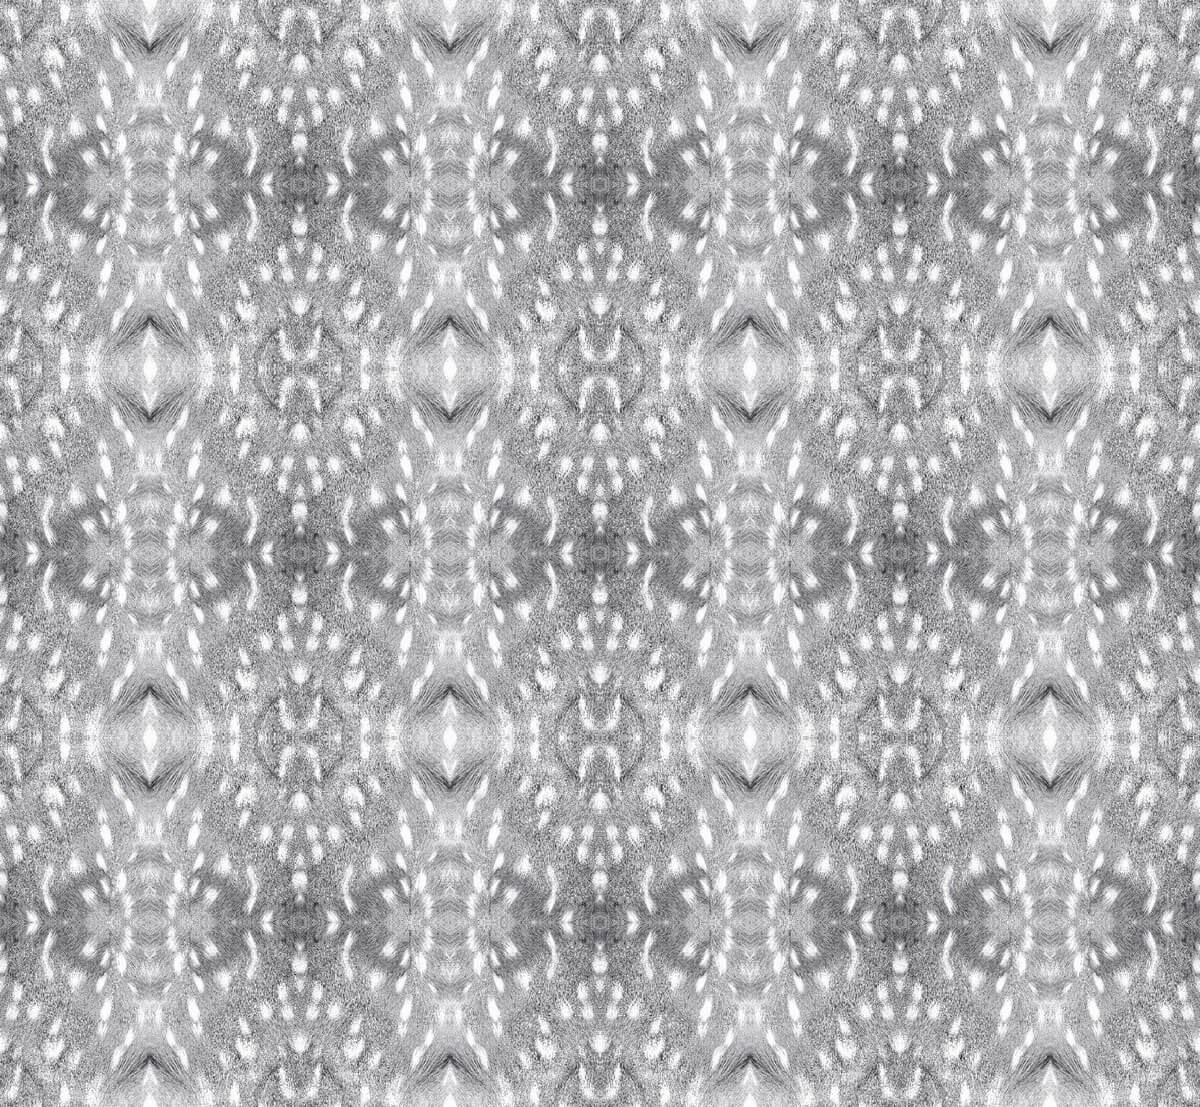 Fawn pattern in gray and white